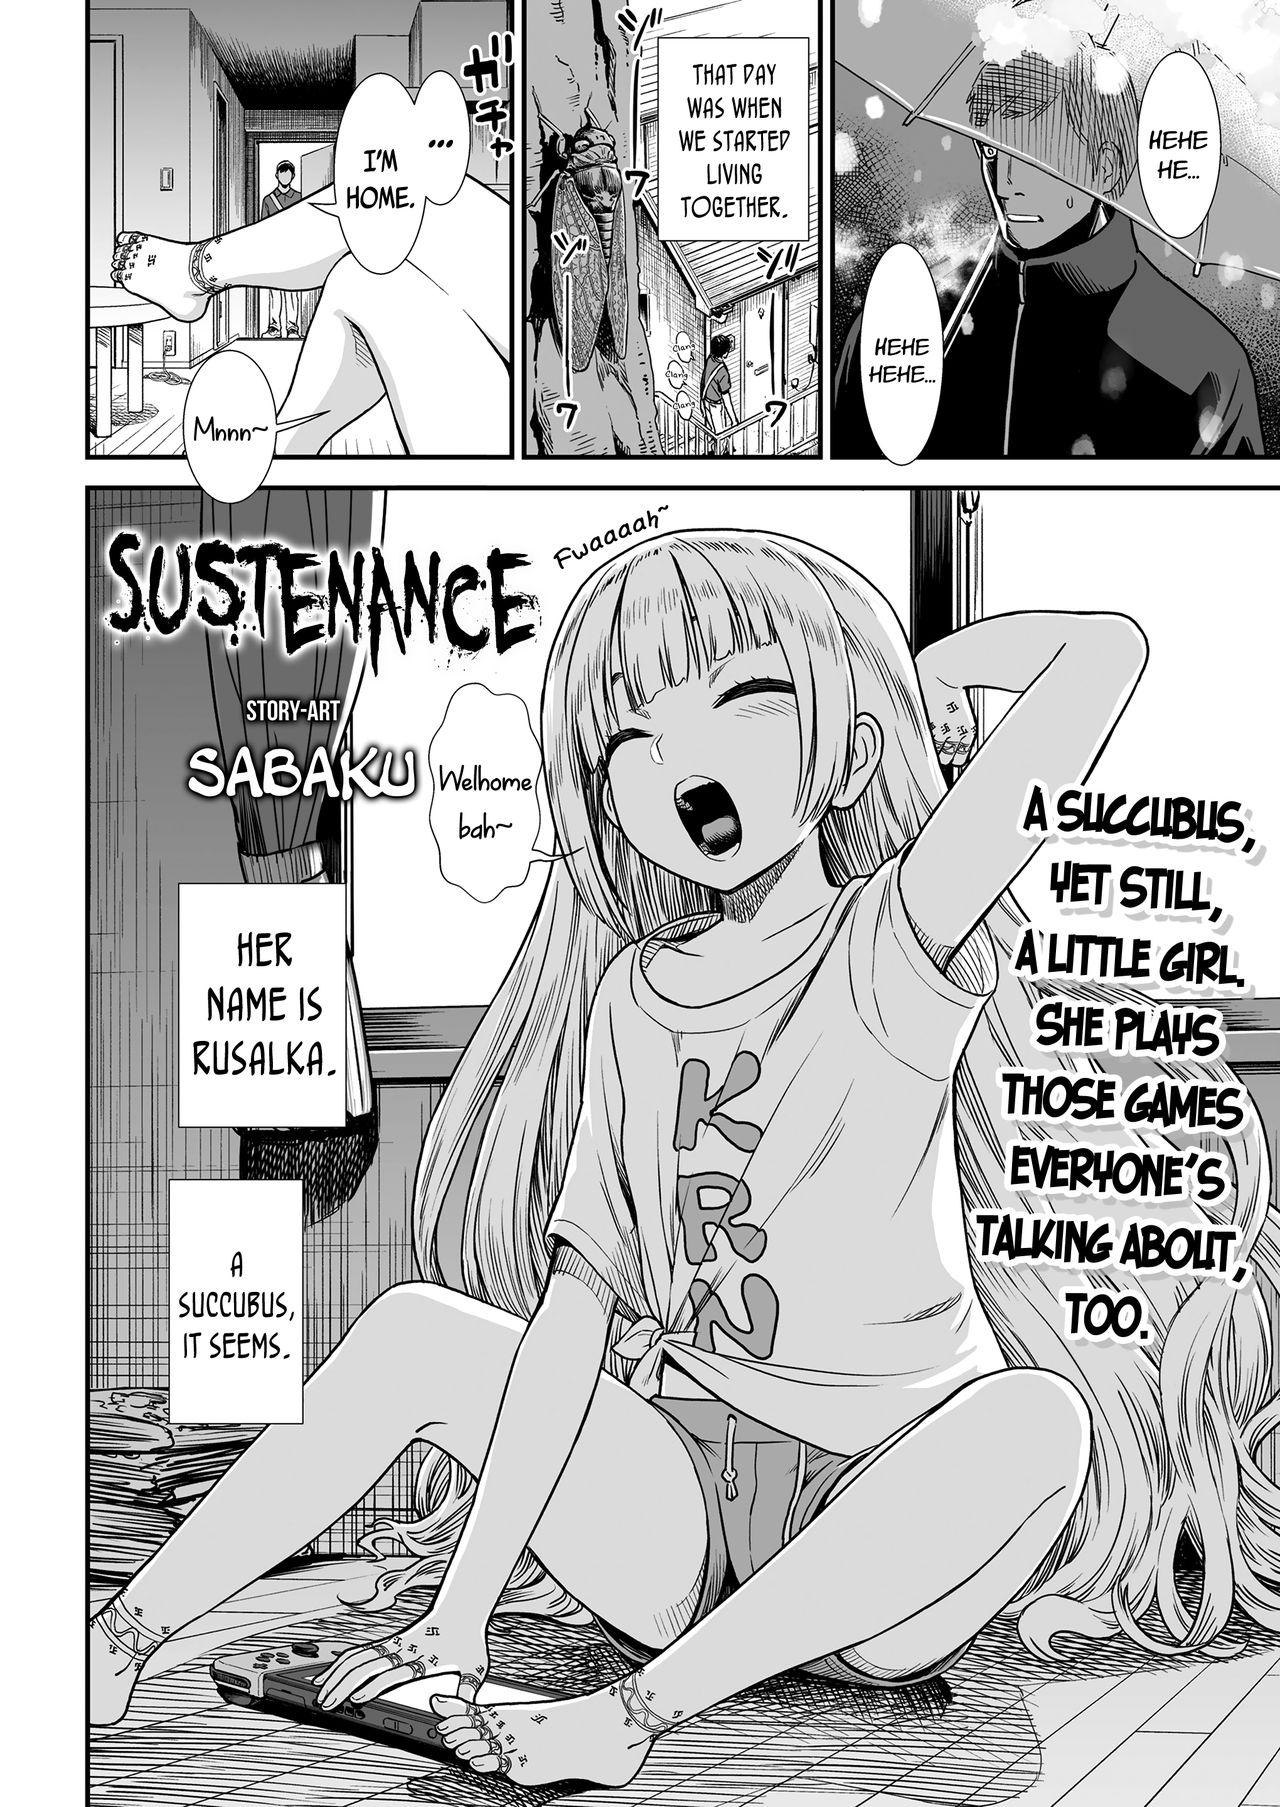 Old Vs Young Esa | Sustenance Best Blowjob Ever - Page 2